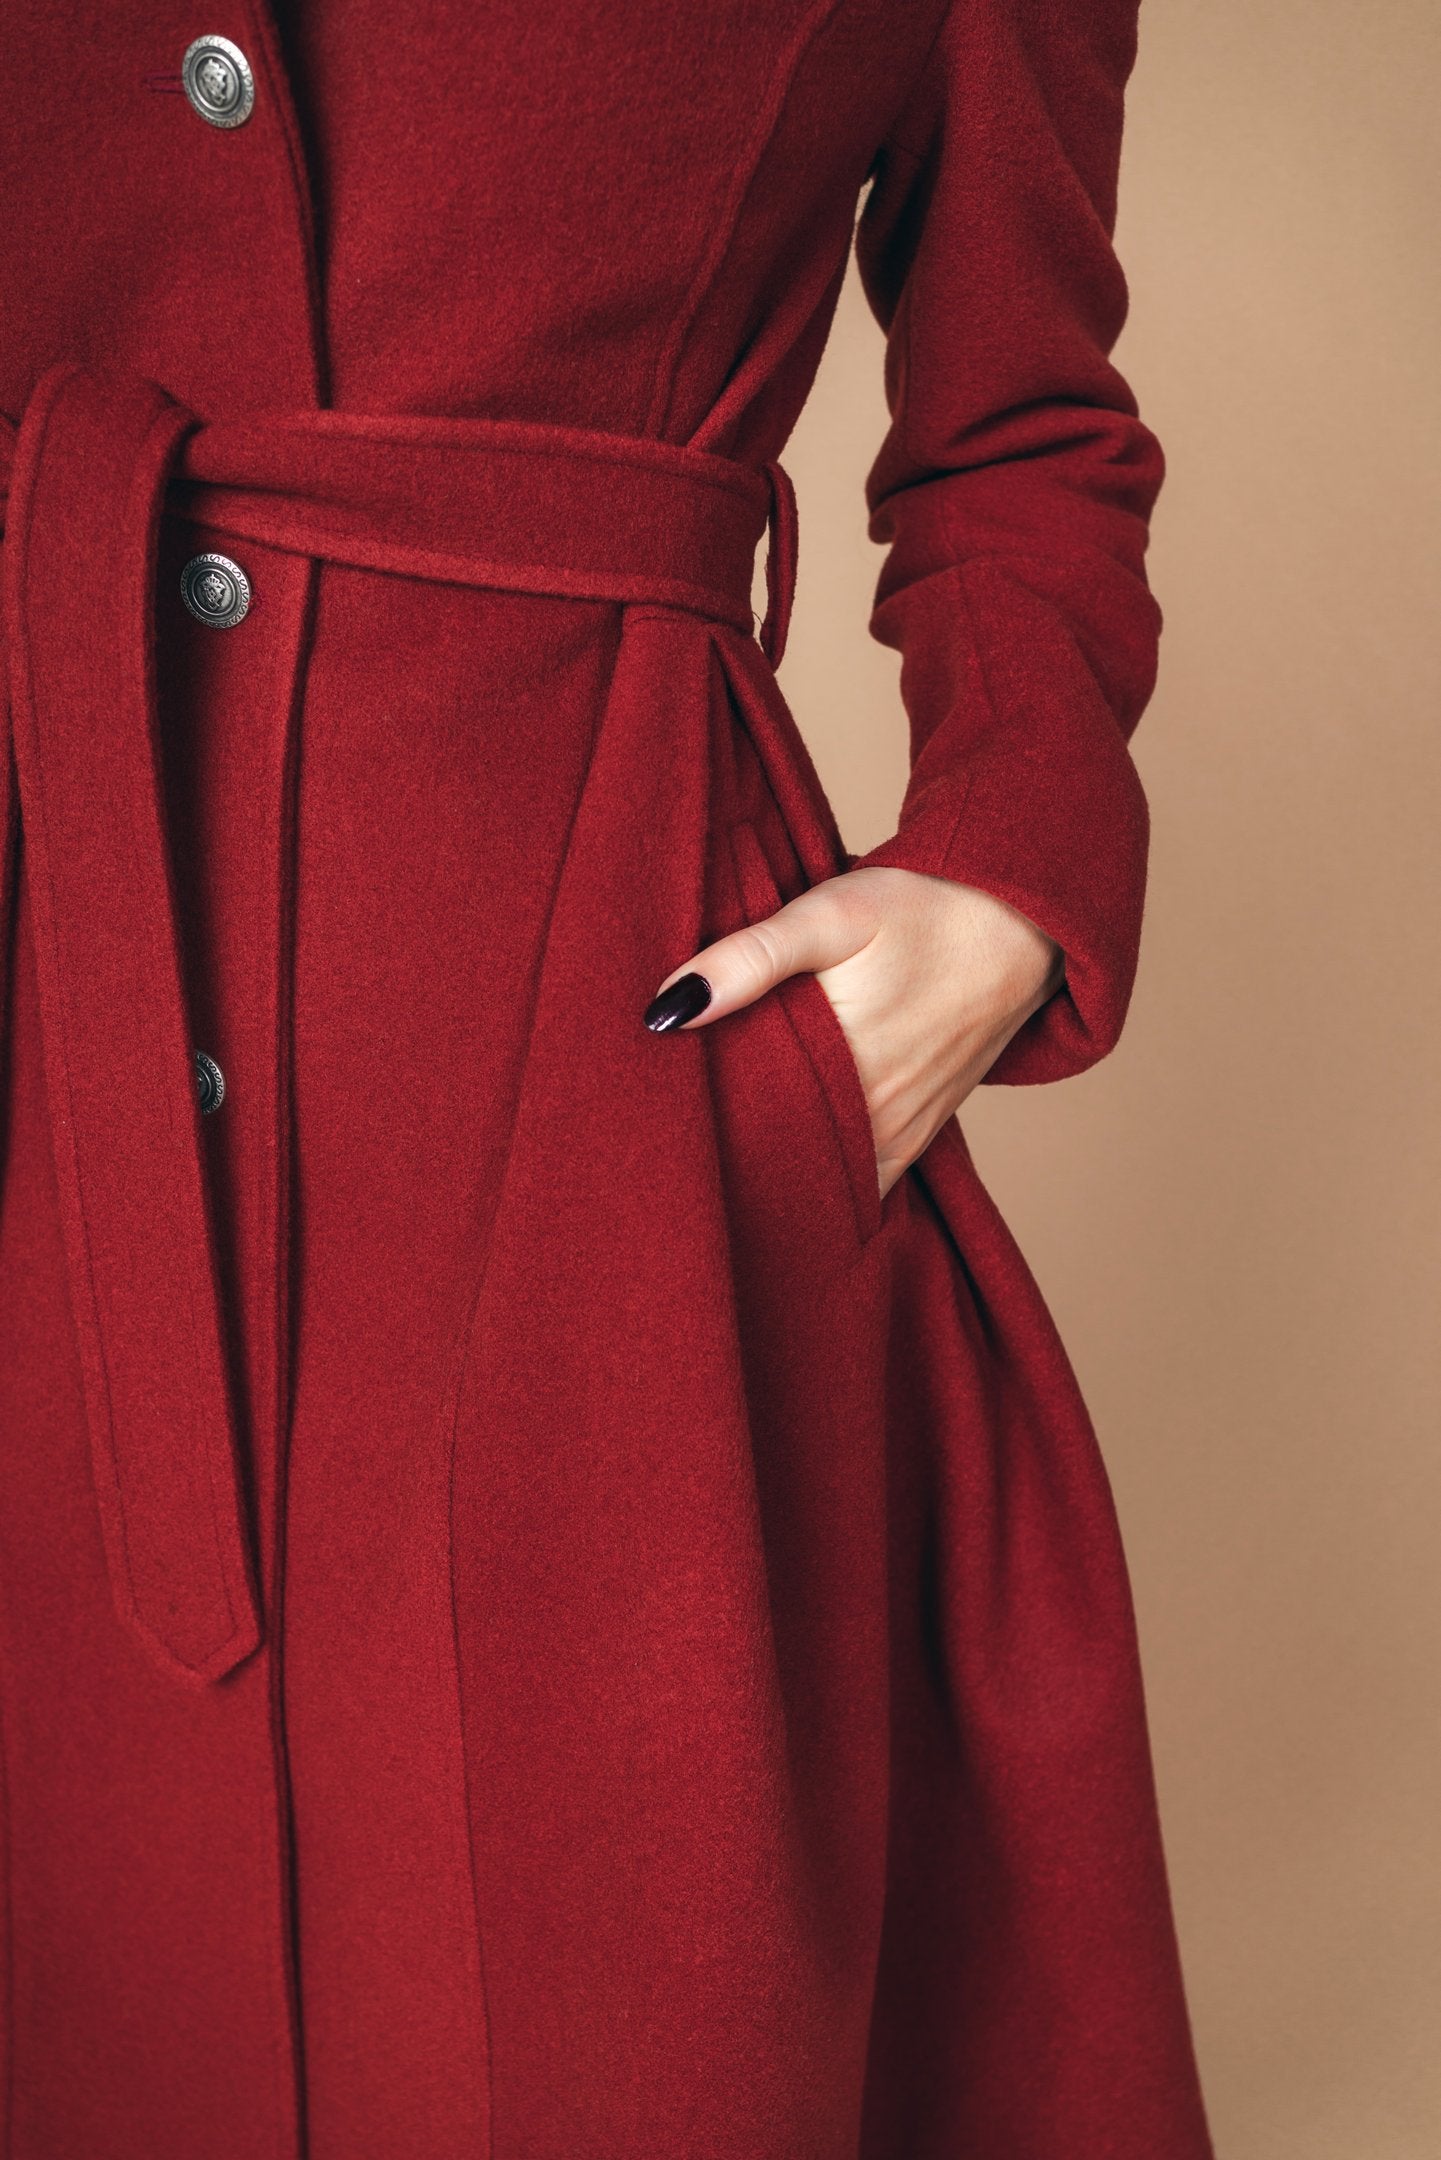 "Sloane" Coat 100% Wool With Lining in Red Brick Colour - front zoomed left pocket